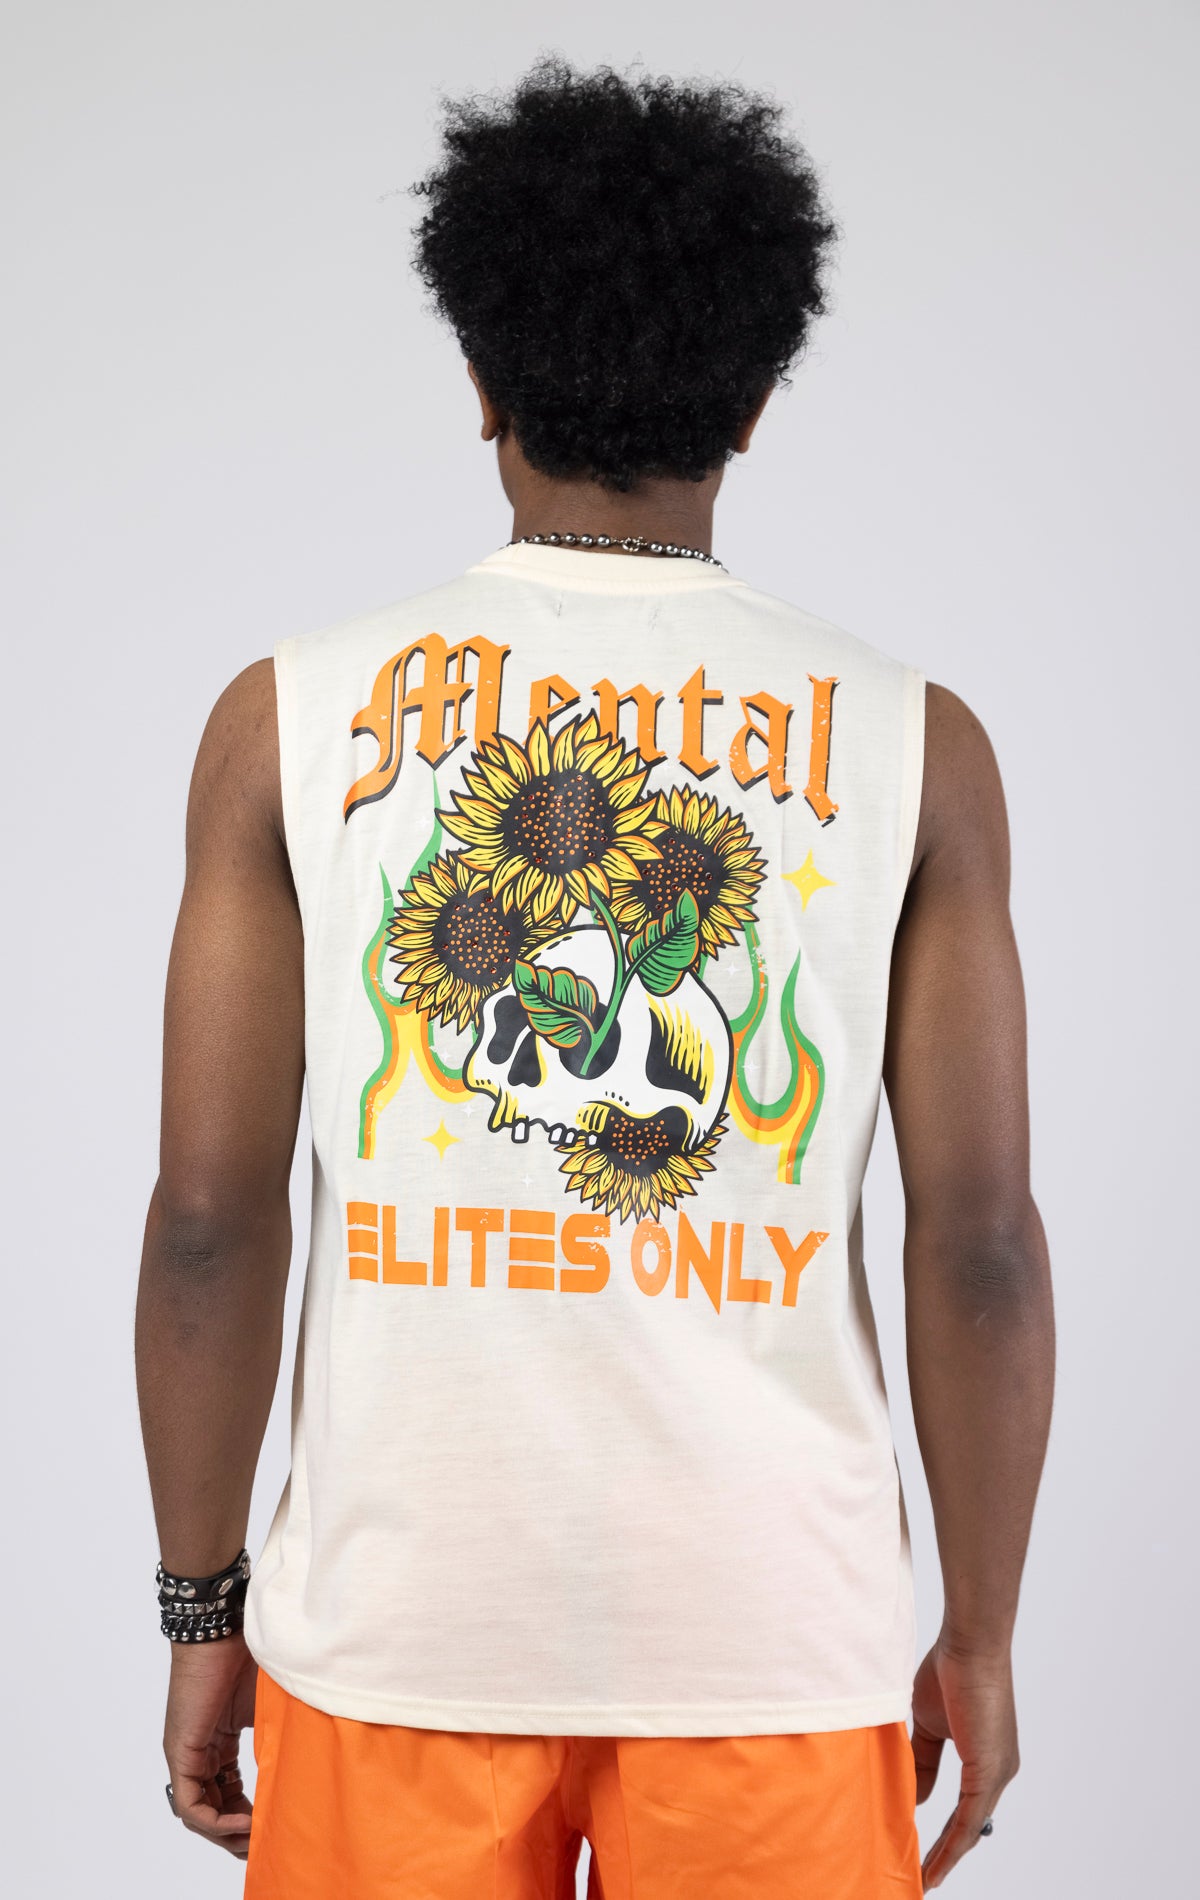 Creme Sleeveless crew neck tank top with a printed graphic.